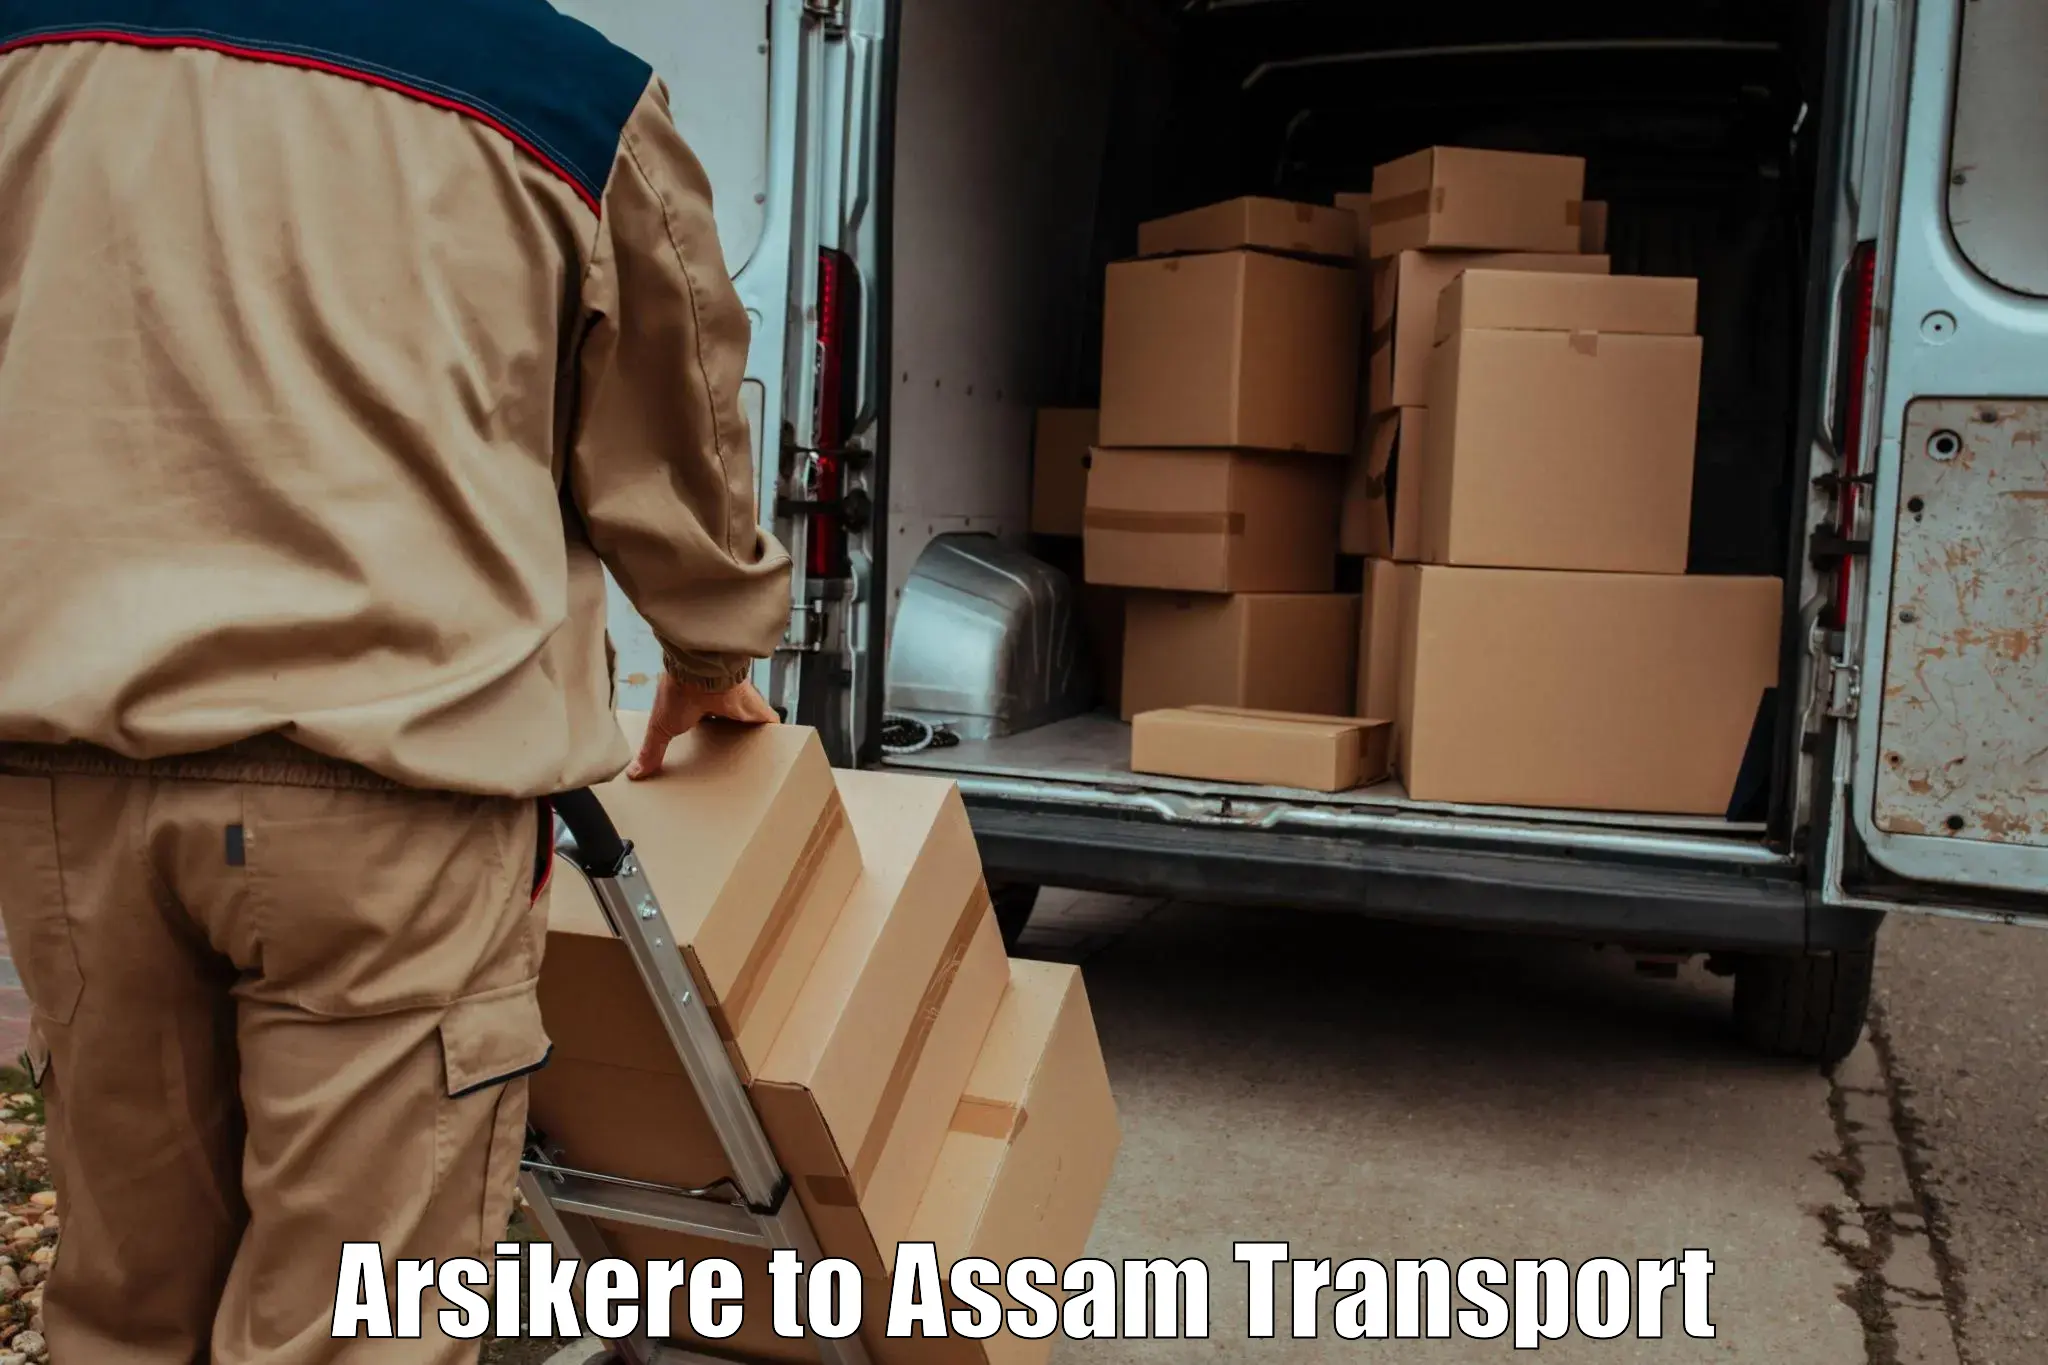 Express transport services Arsikere to Banderdewa